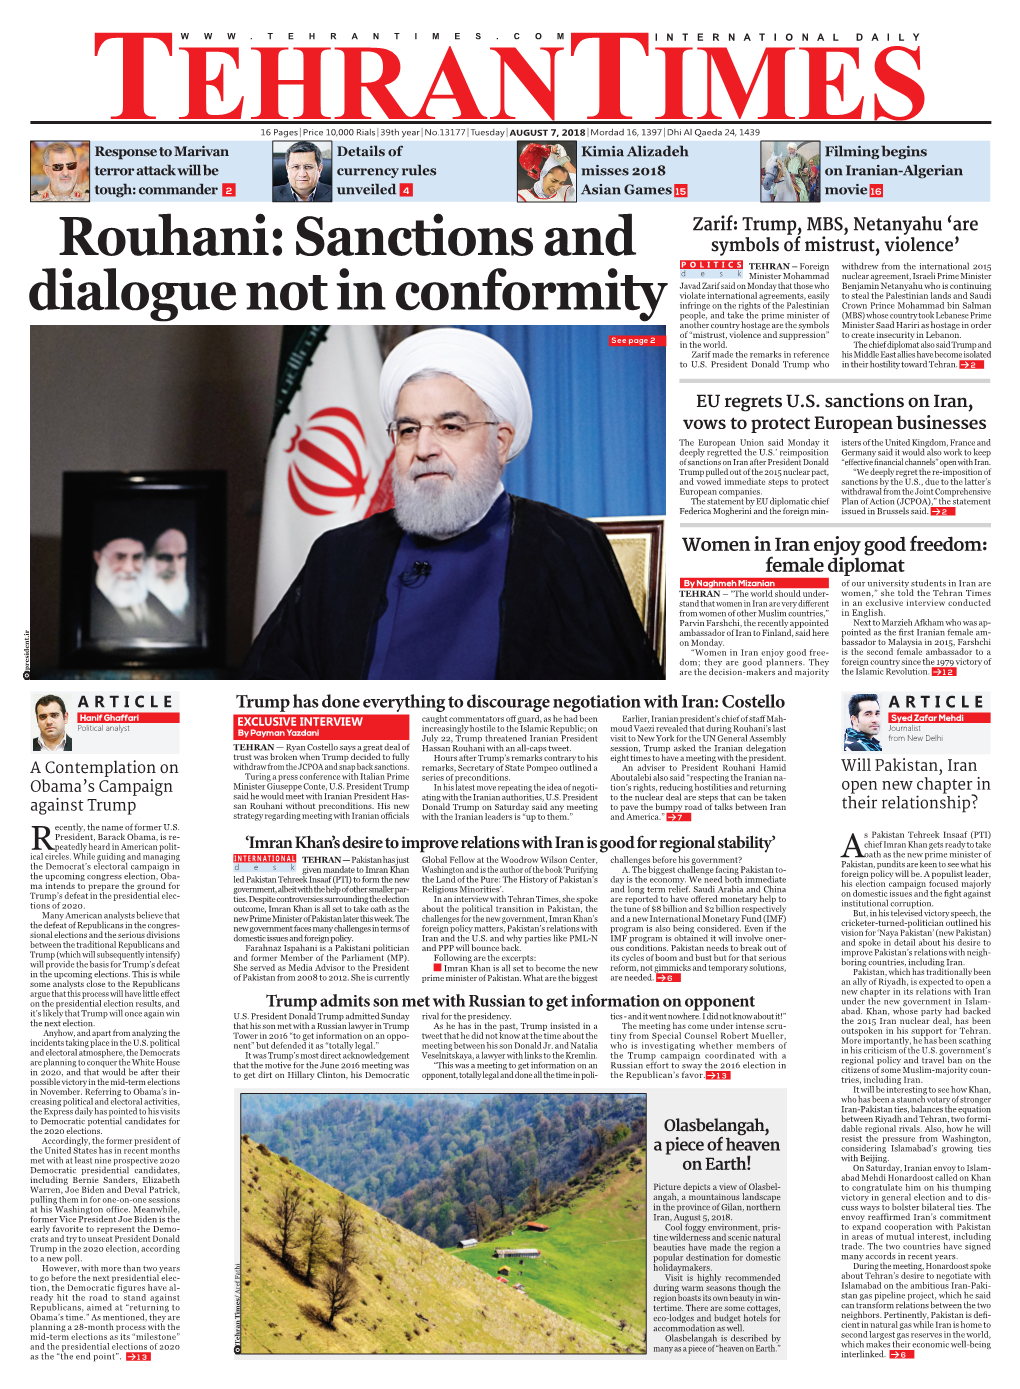 Rouhani: Sanctions and Dialogue Not in Conformity